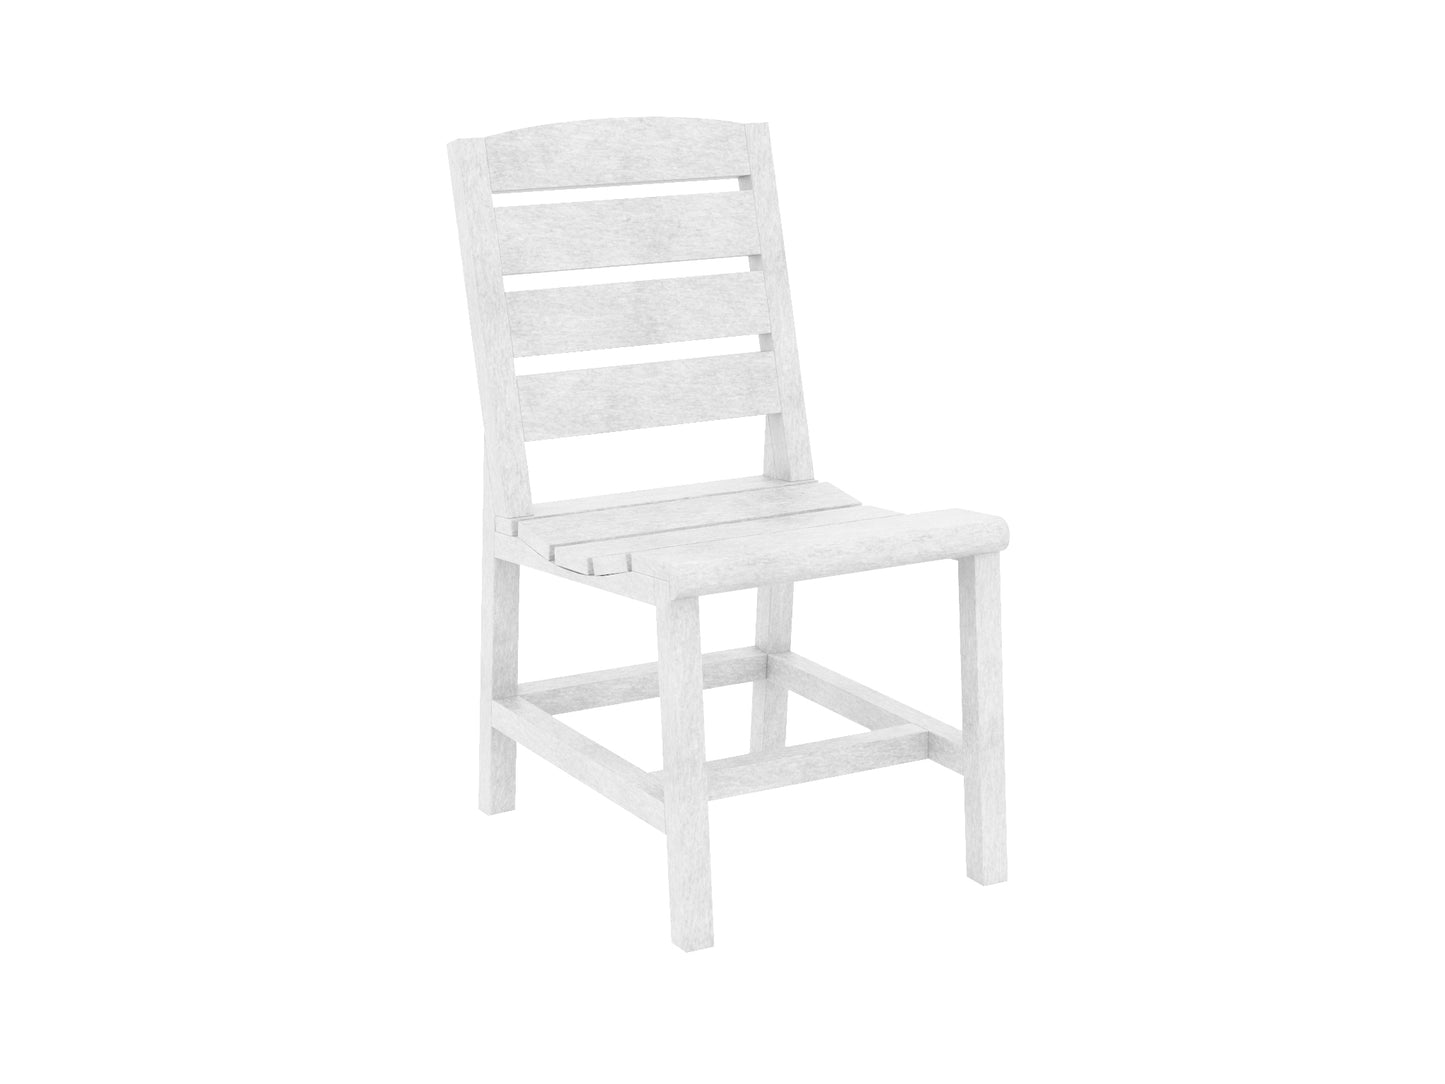 Napa Dining Side Chair - C301